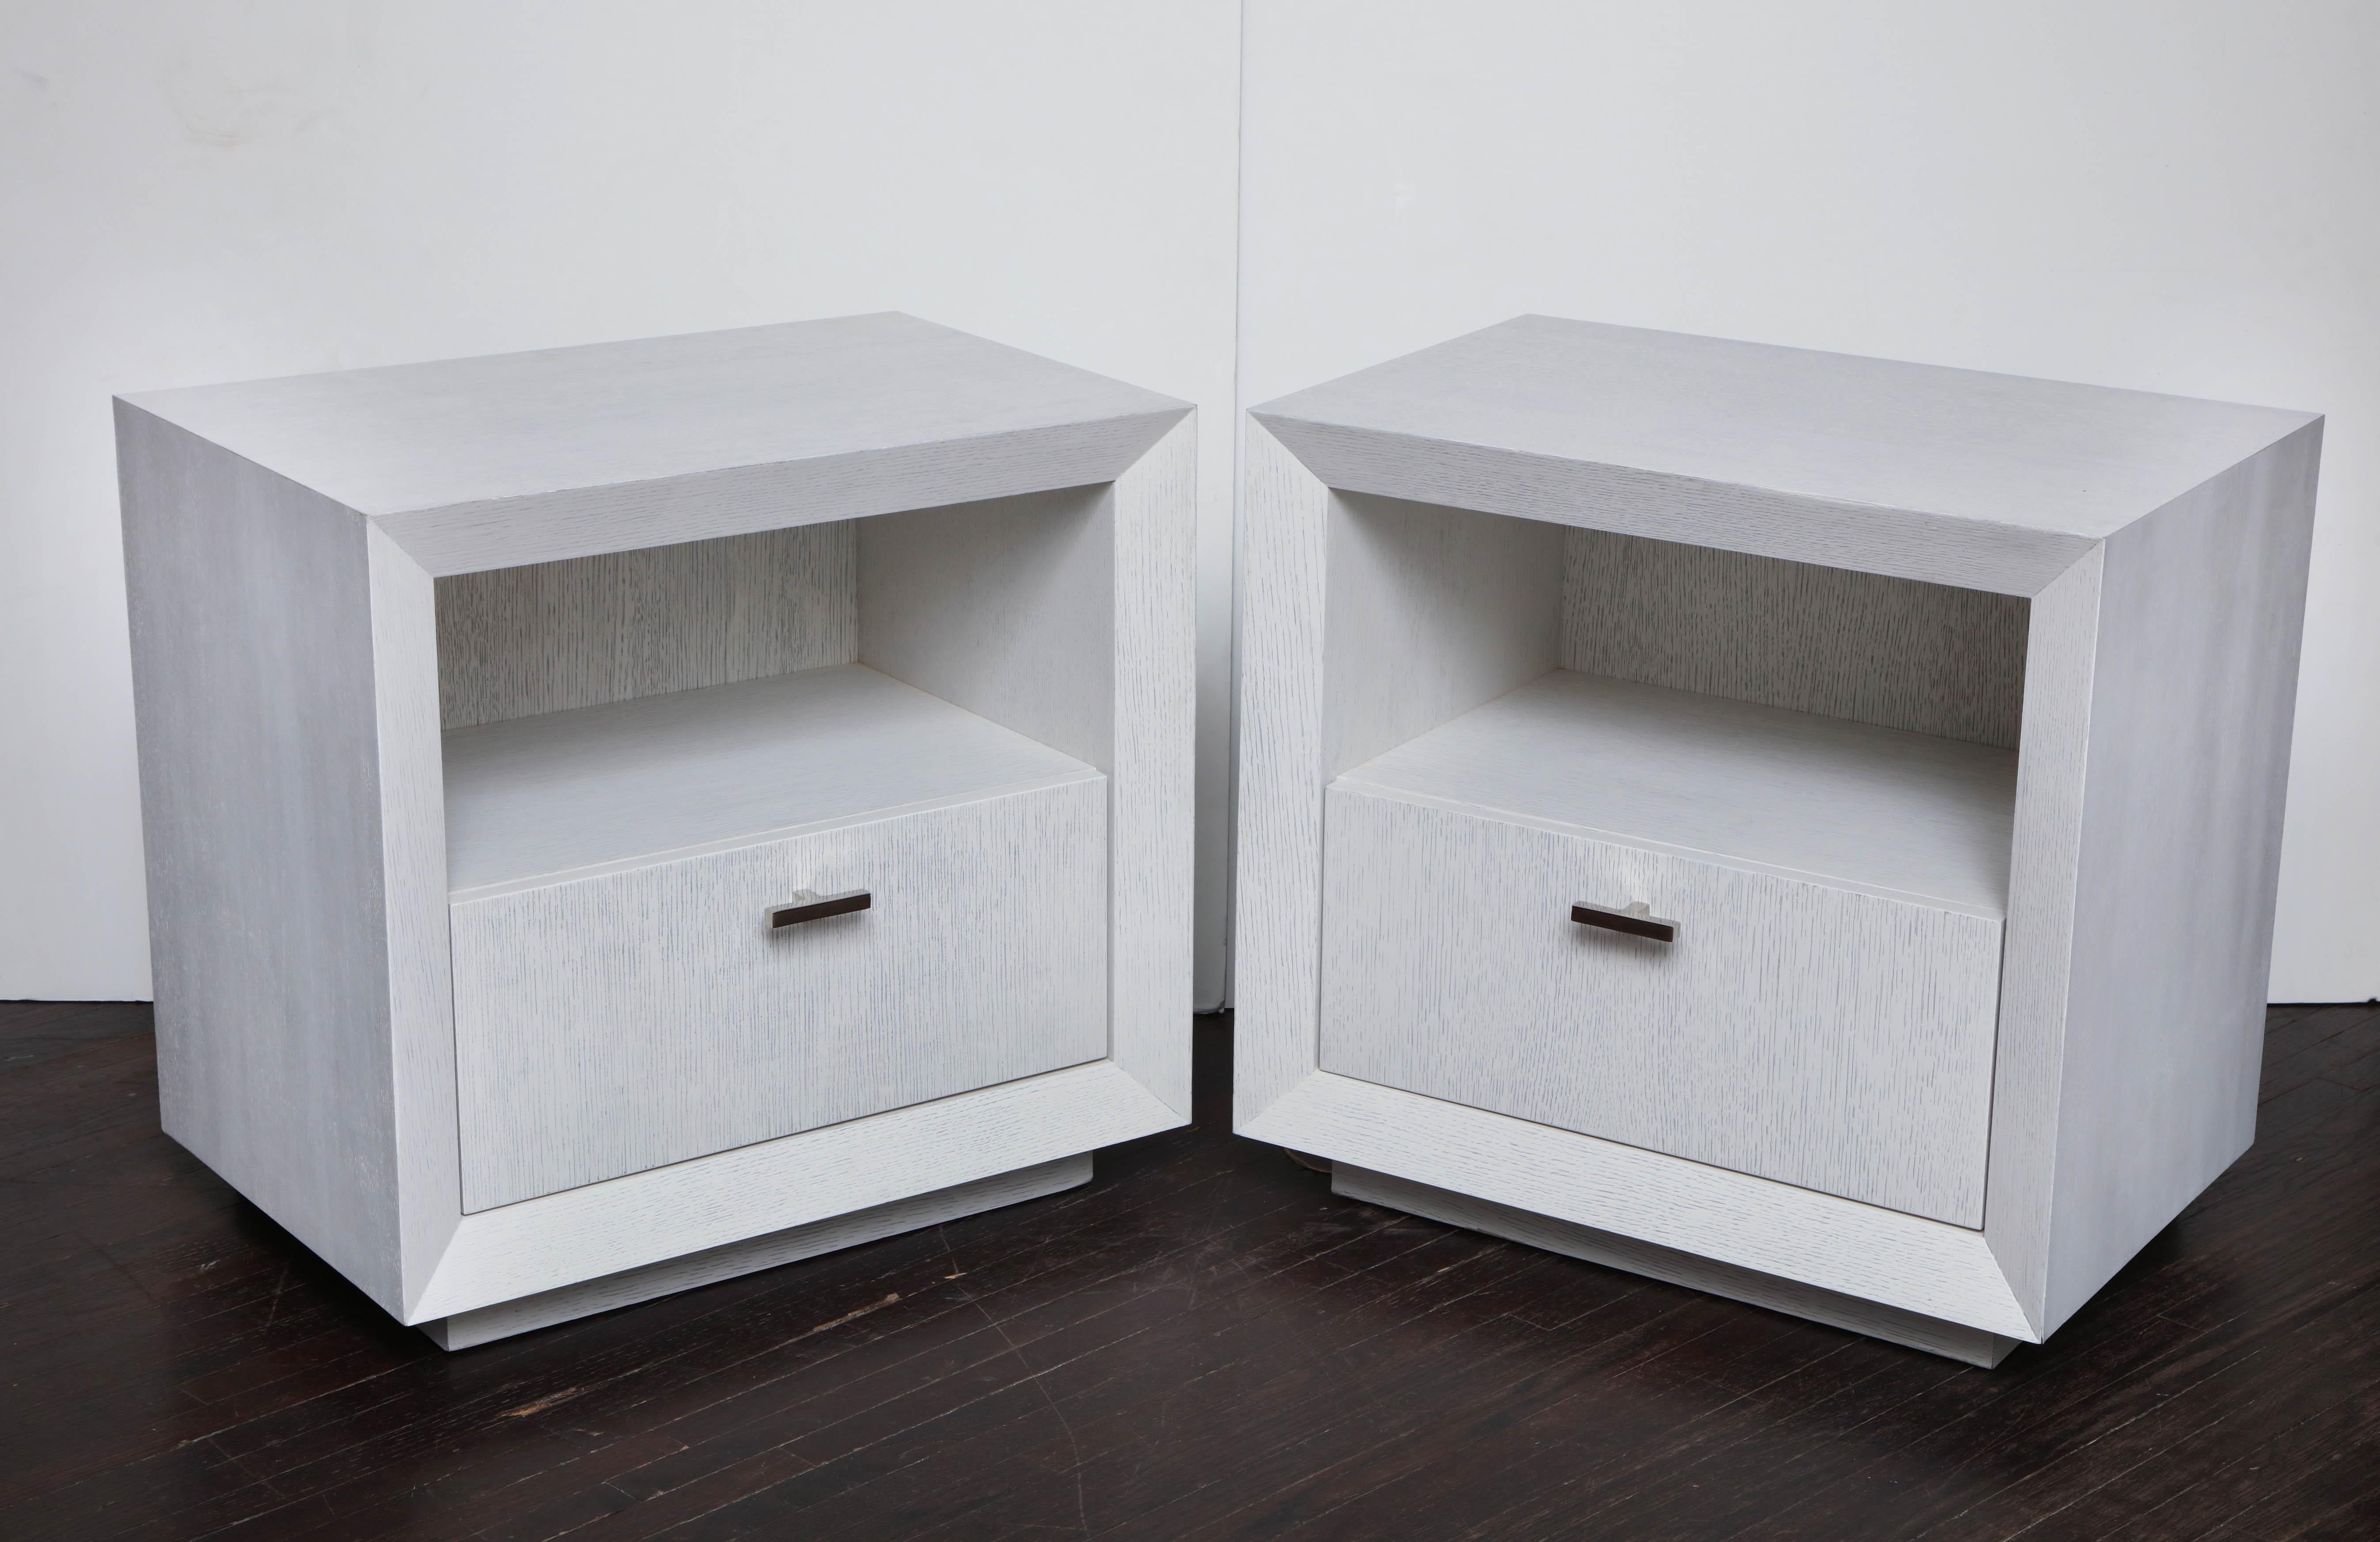 Pair of custom painted cerused wood nightstands with polished nickel pull. The drawer interior finish is shown in maple. Customization is available in different sizes, colors, interior finish, and hardware (Customer Owned Hardware).